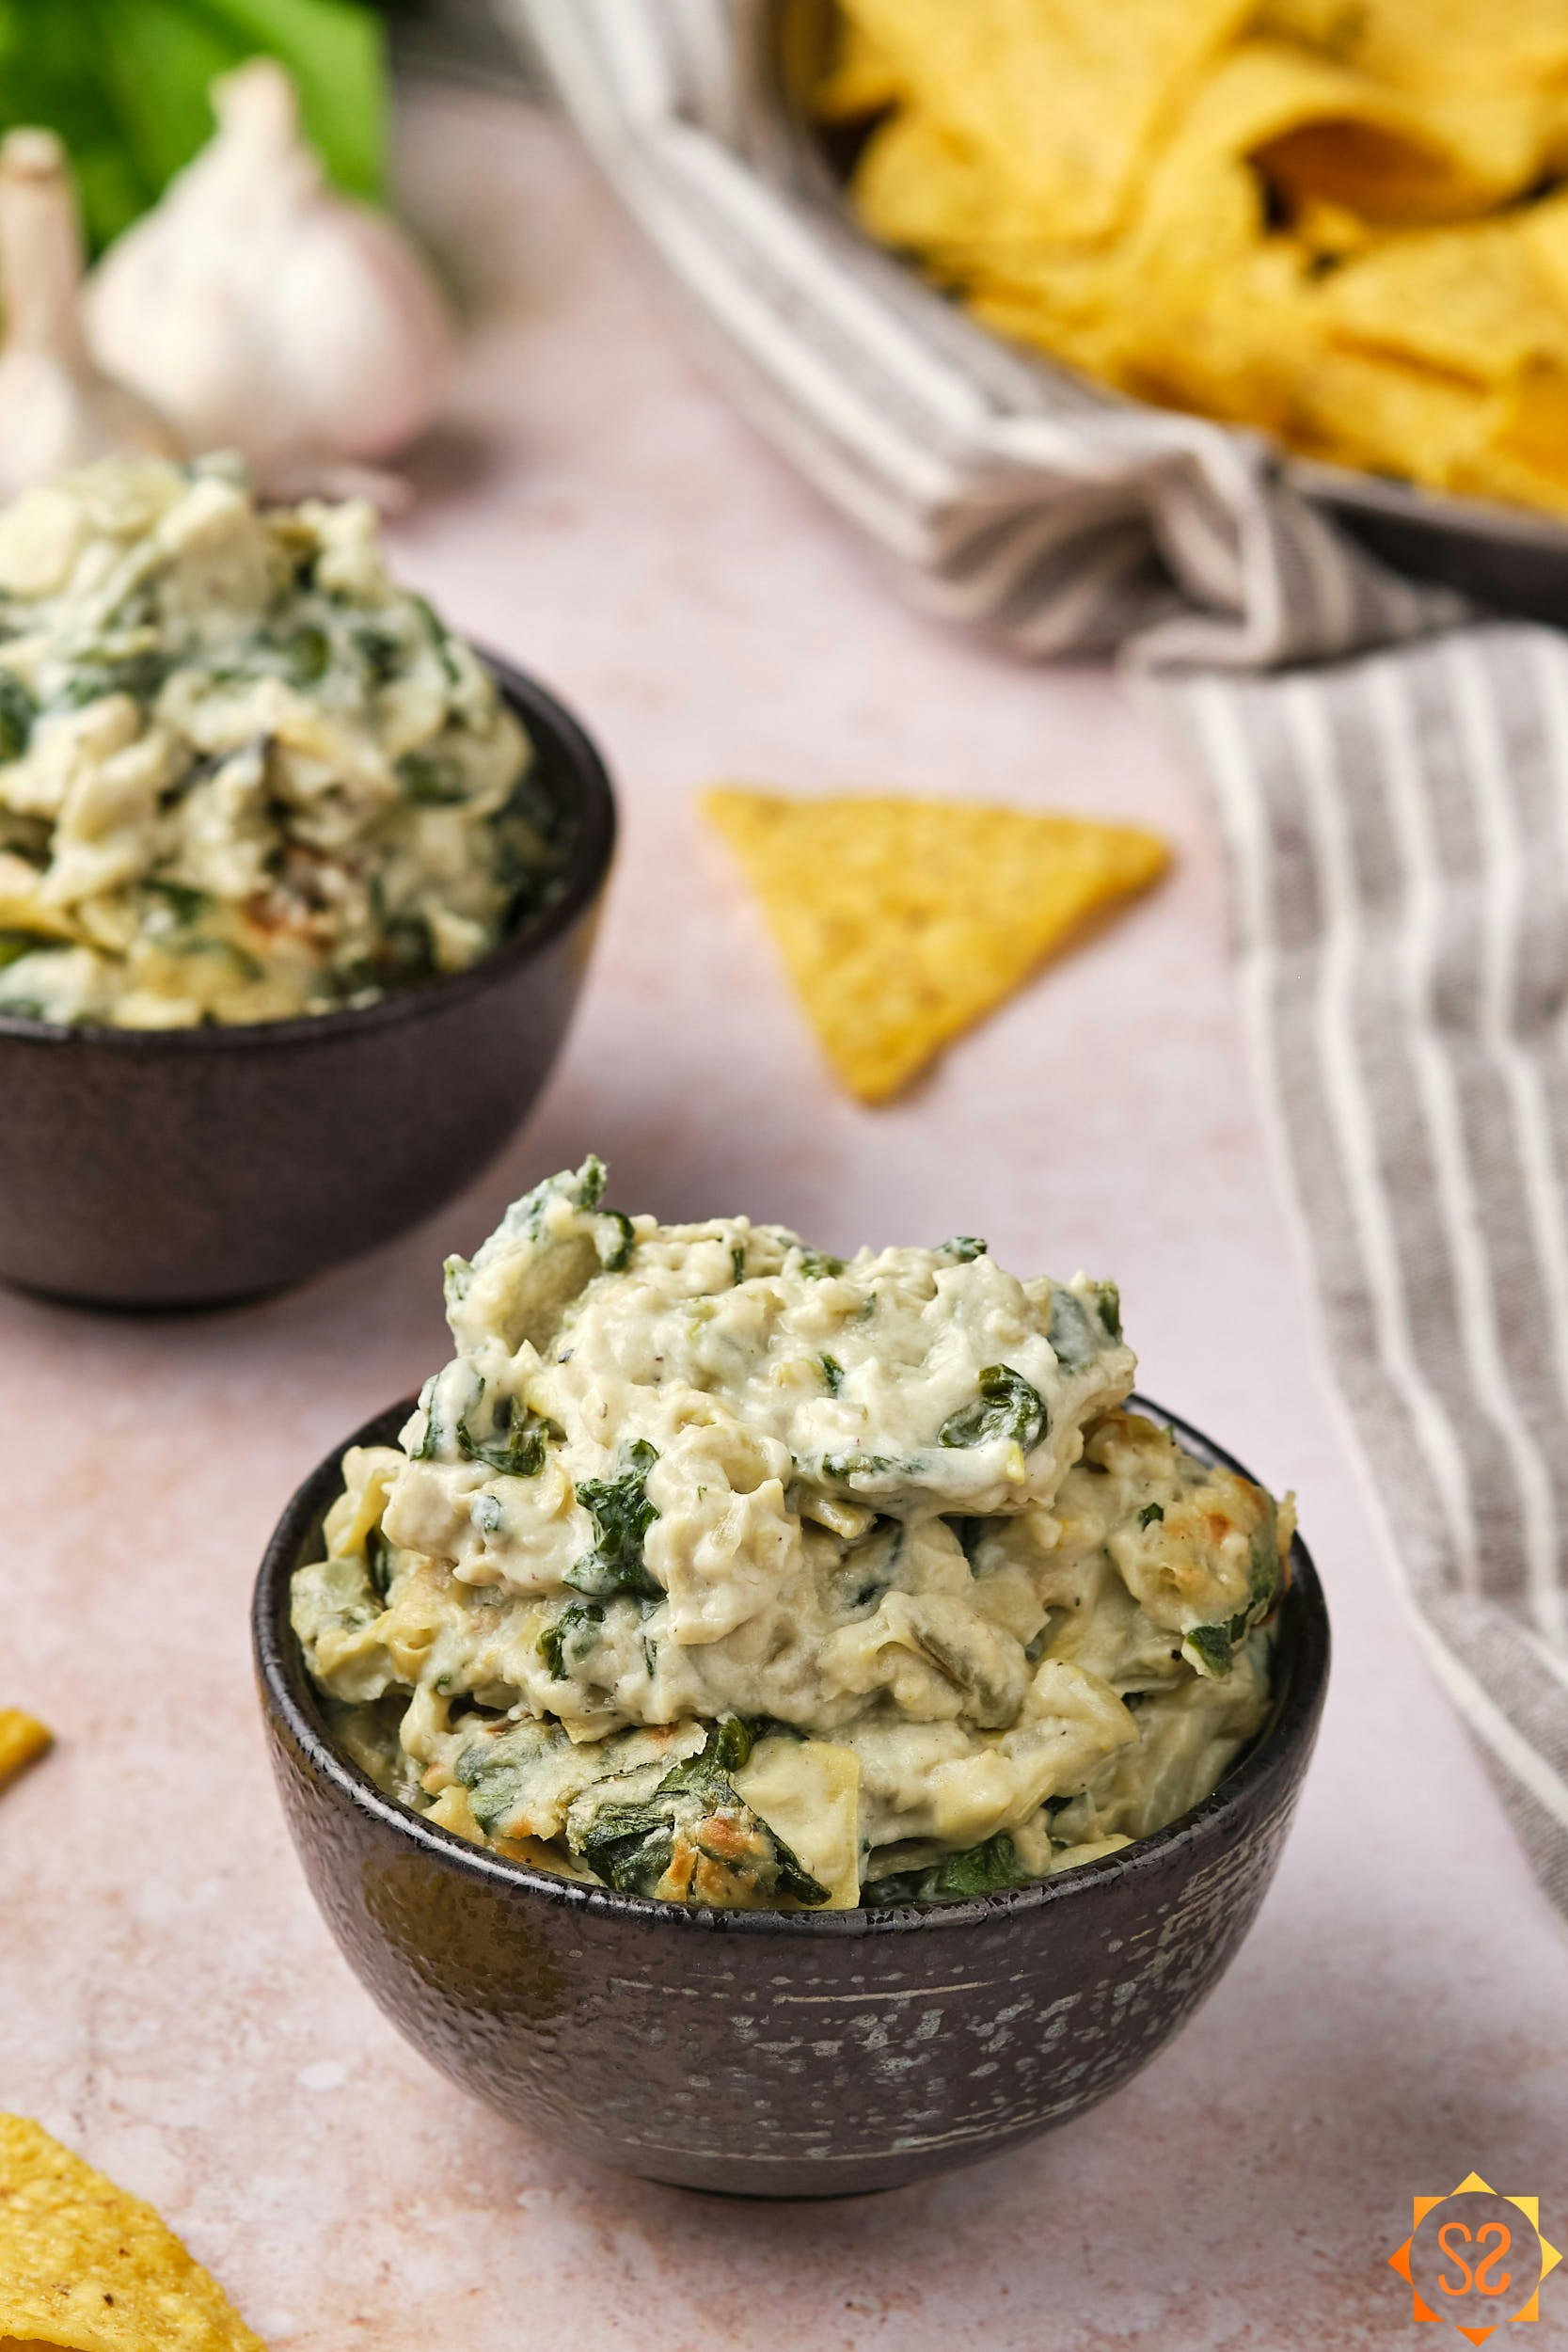 Two bowls of vegan spinach and artichoke dip, with chips in the background.